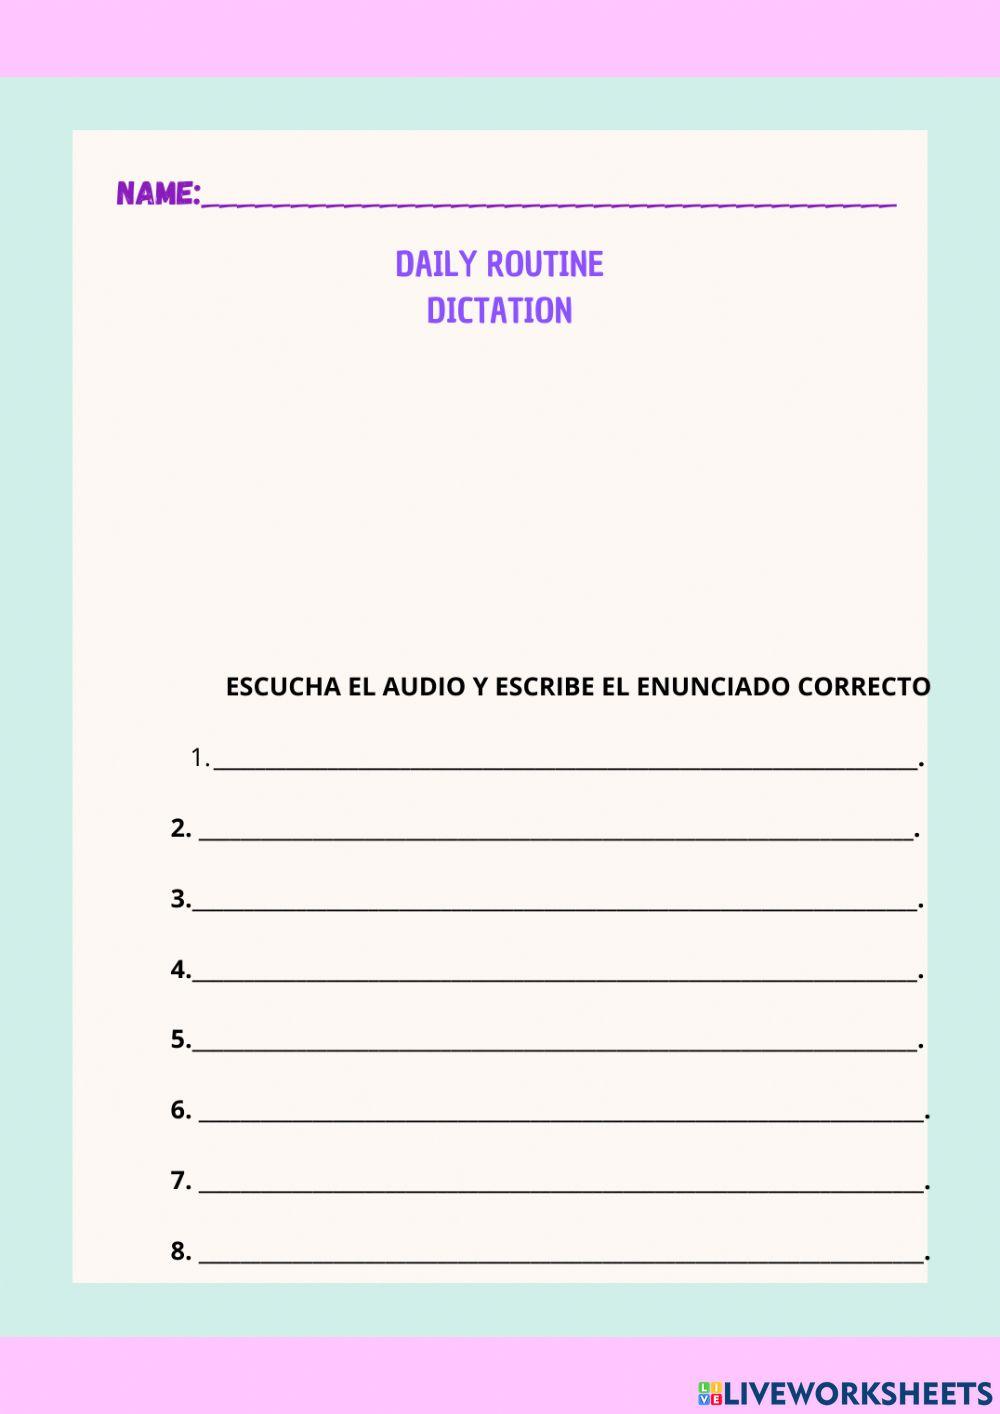 DICTATION-DAILY ROUTINES